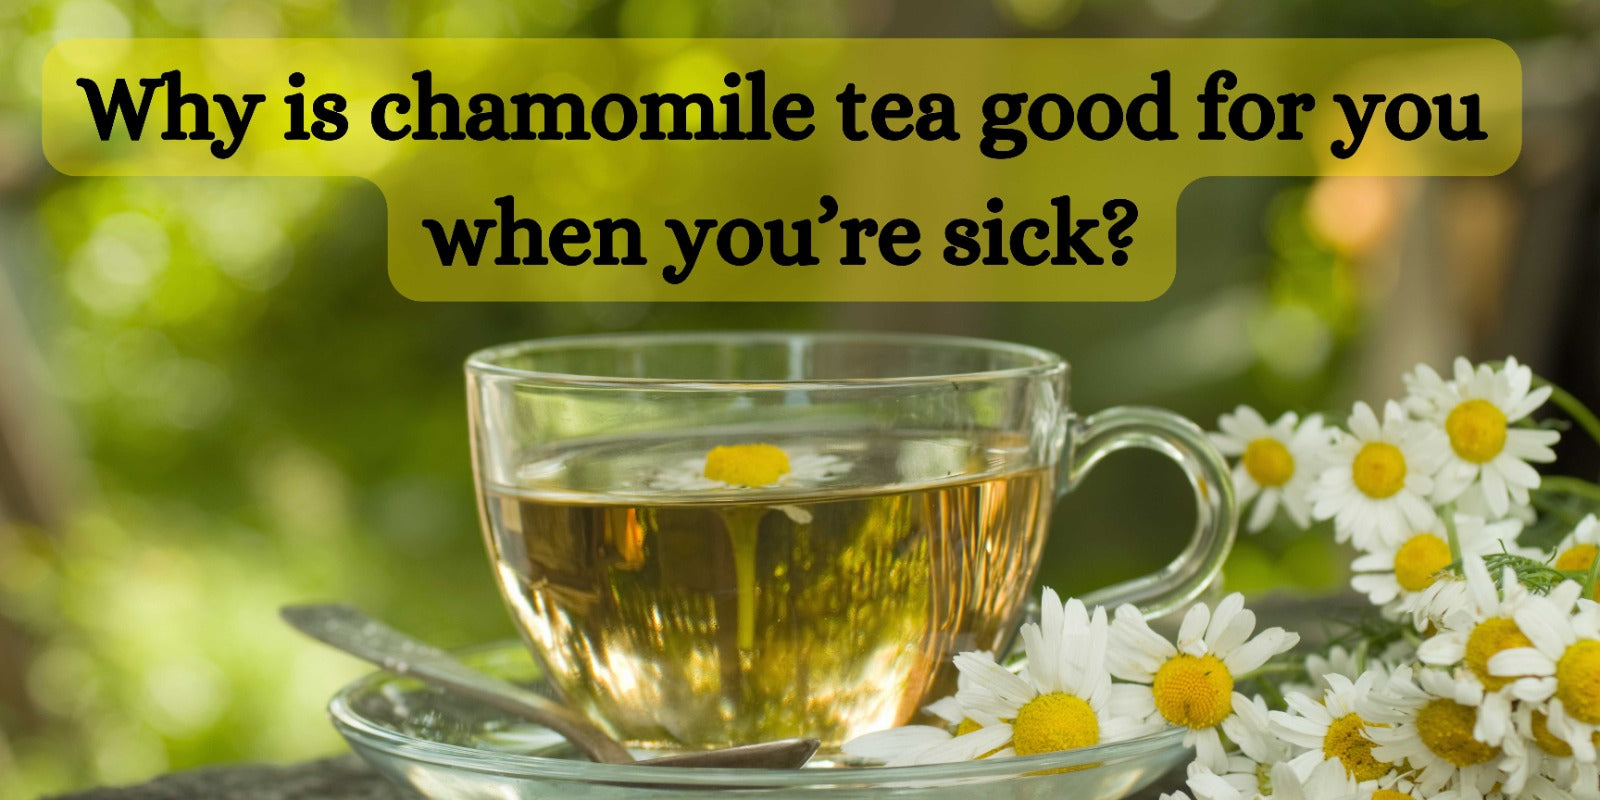 Why is chamomile tea good for you when you’re sick?